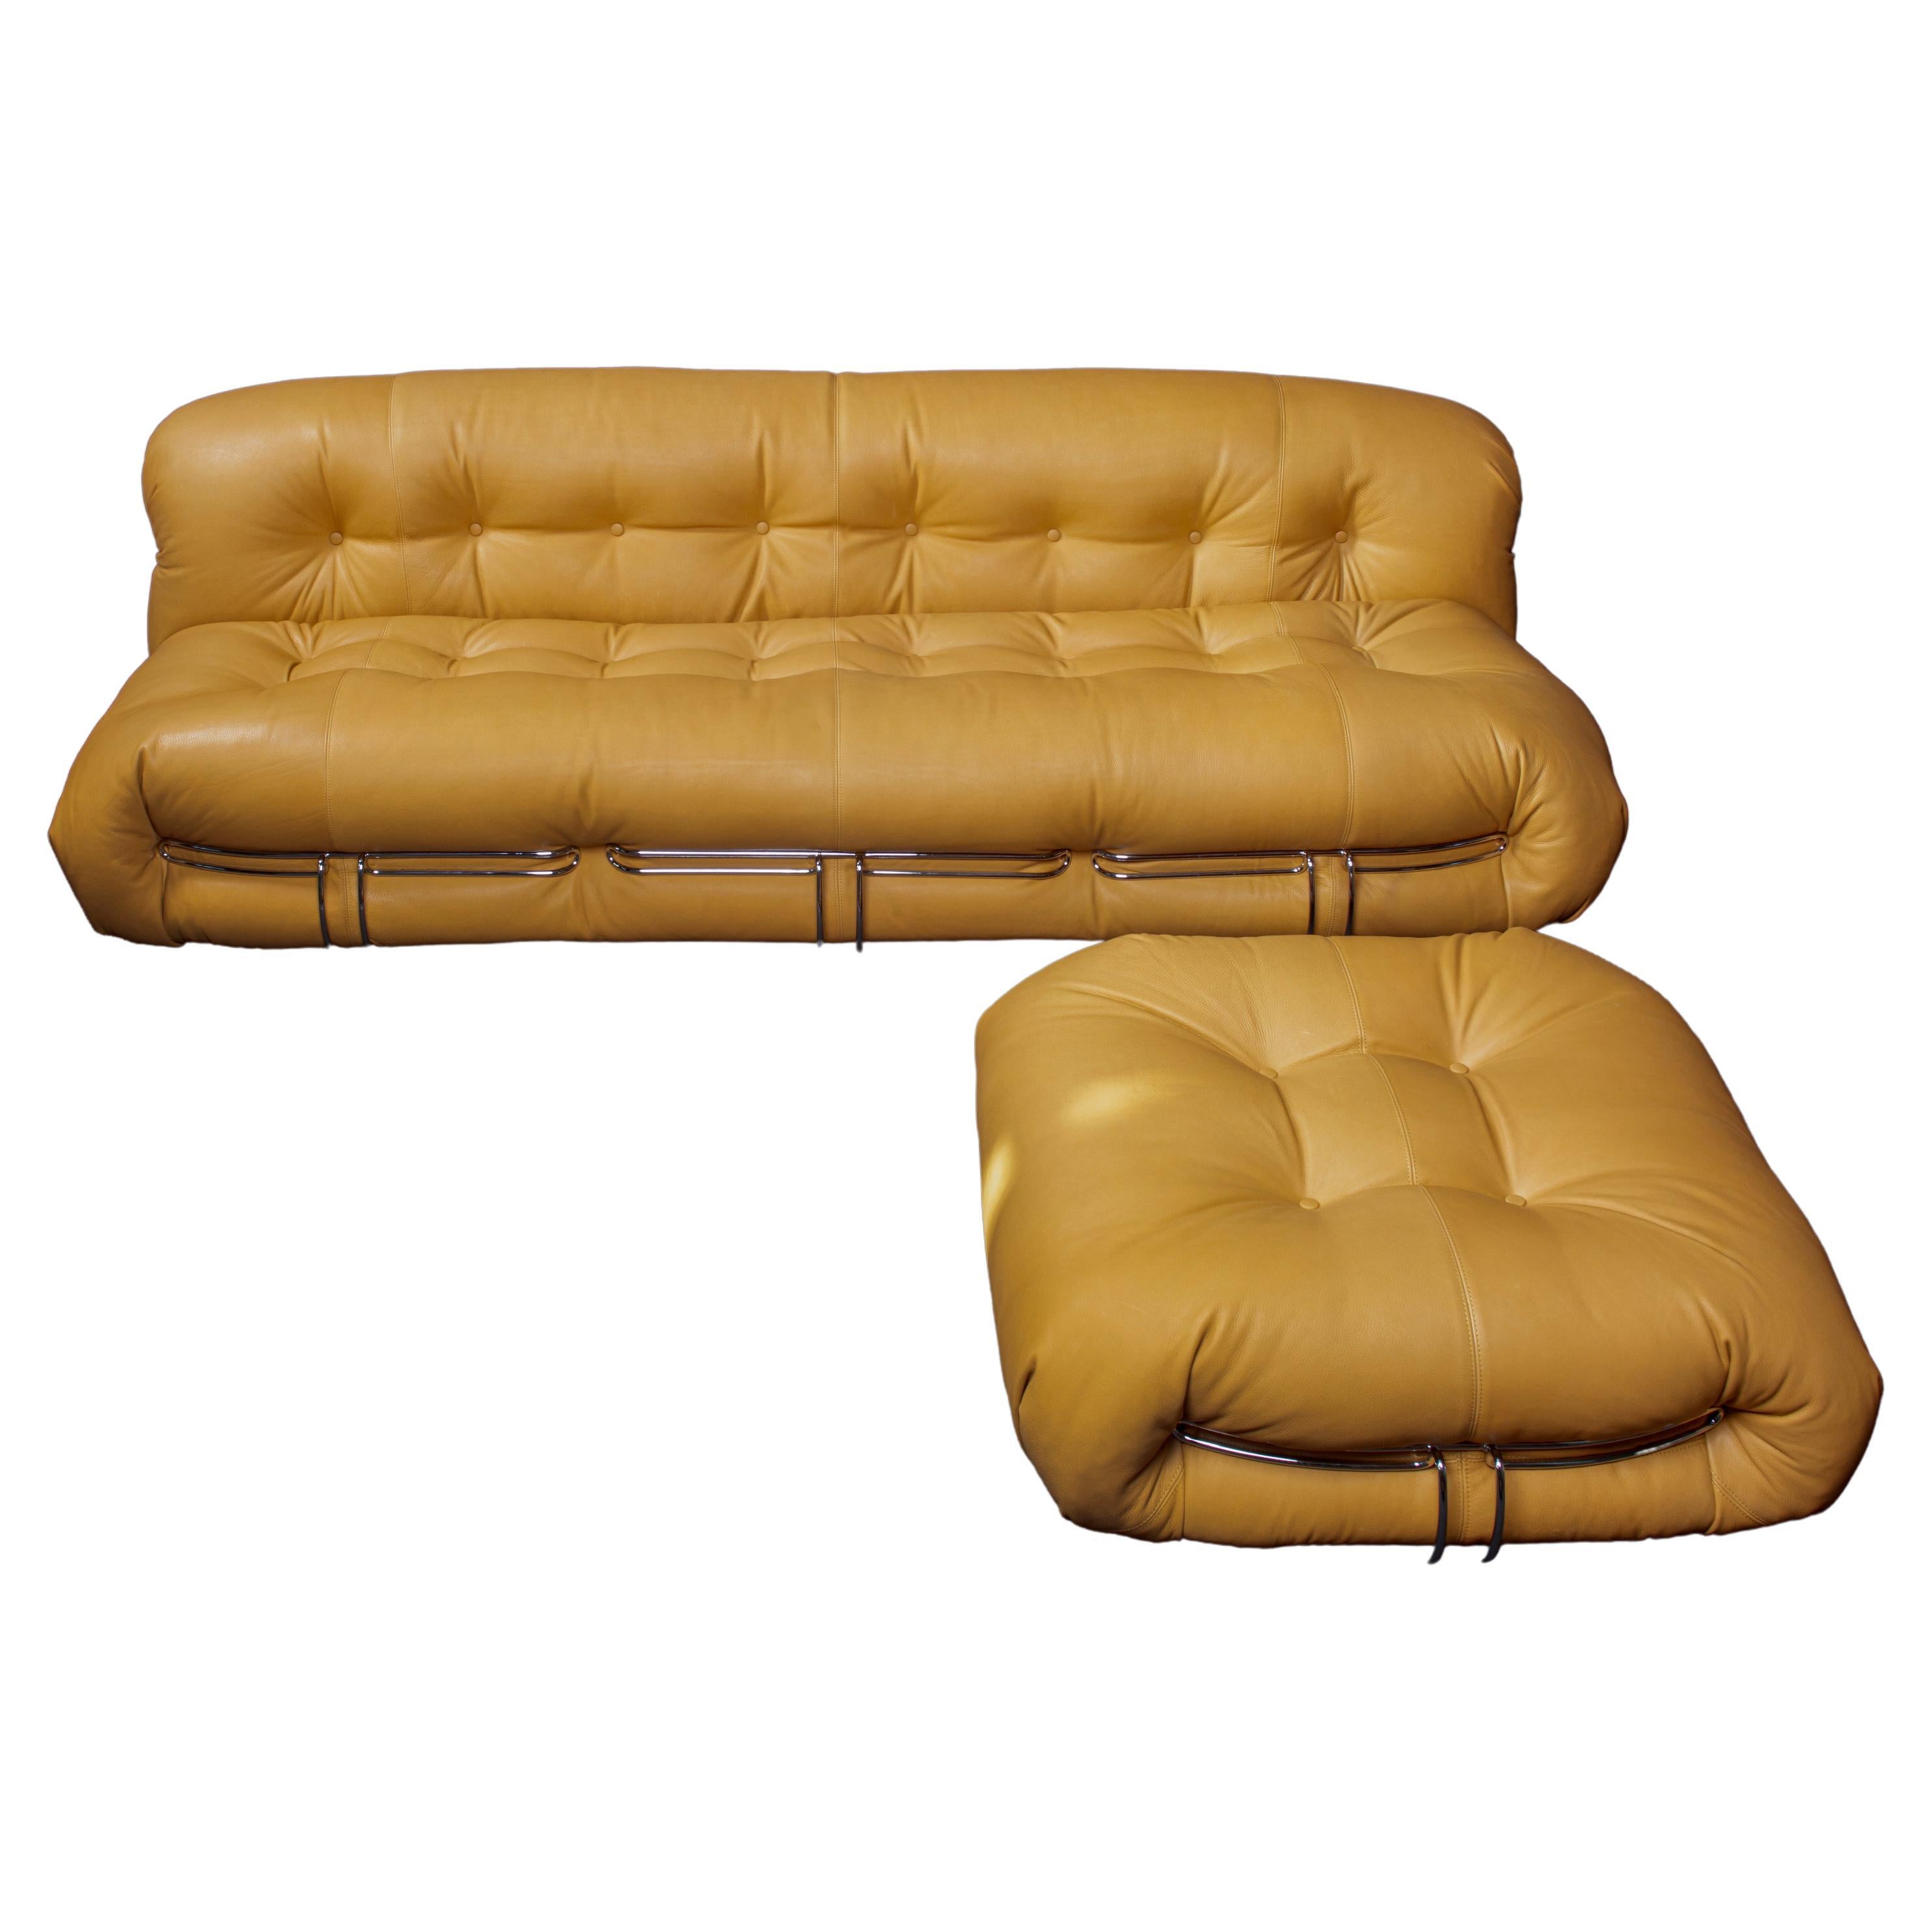 Afra & Tobia Scarpa Soriana sofa and ottoman in light tobacco leather by Cassina in aniline leather.
The ottoman is 95x82x42cm.